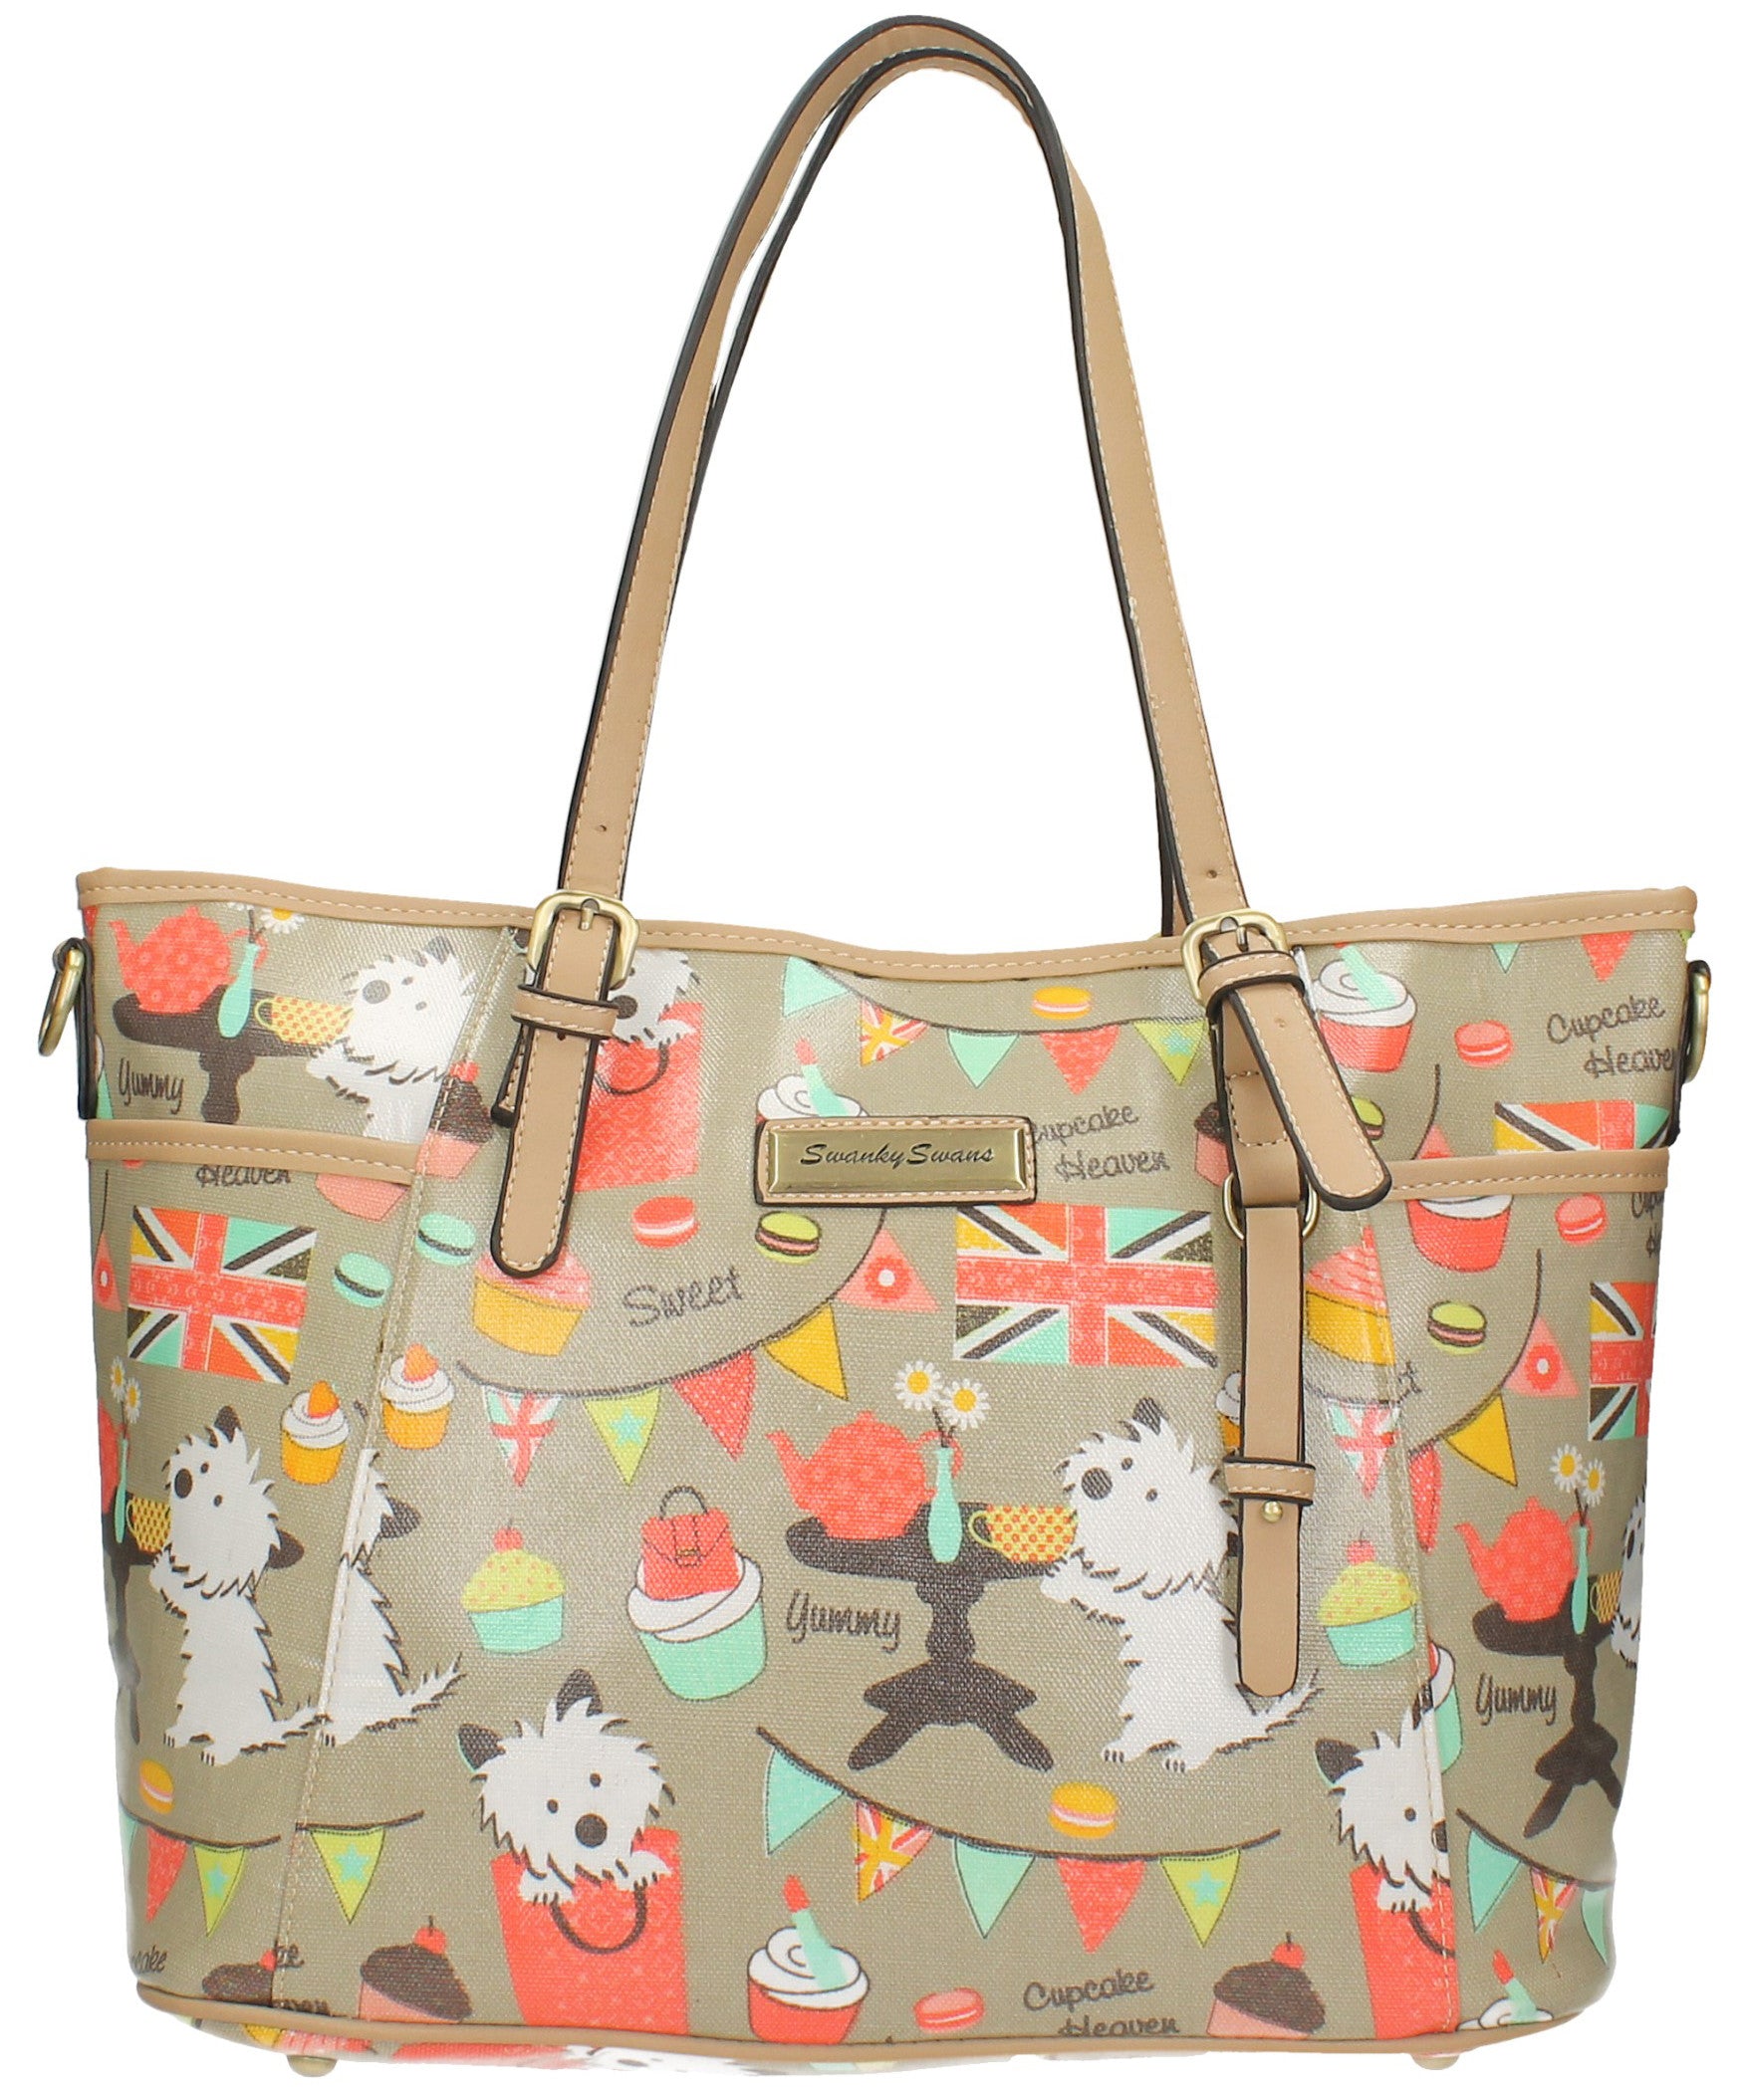 Swanky Swans Biba Dog Cupcake Tote Perfect for Back To School!